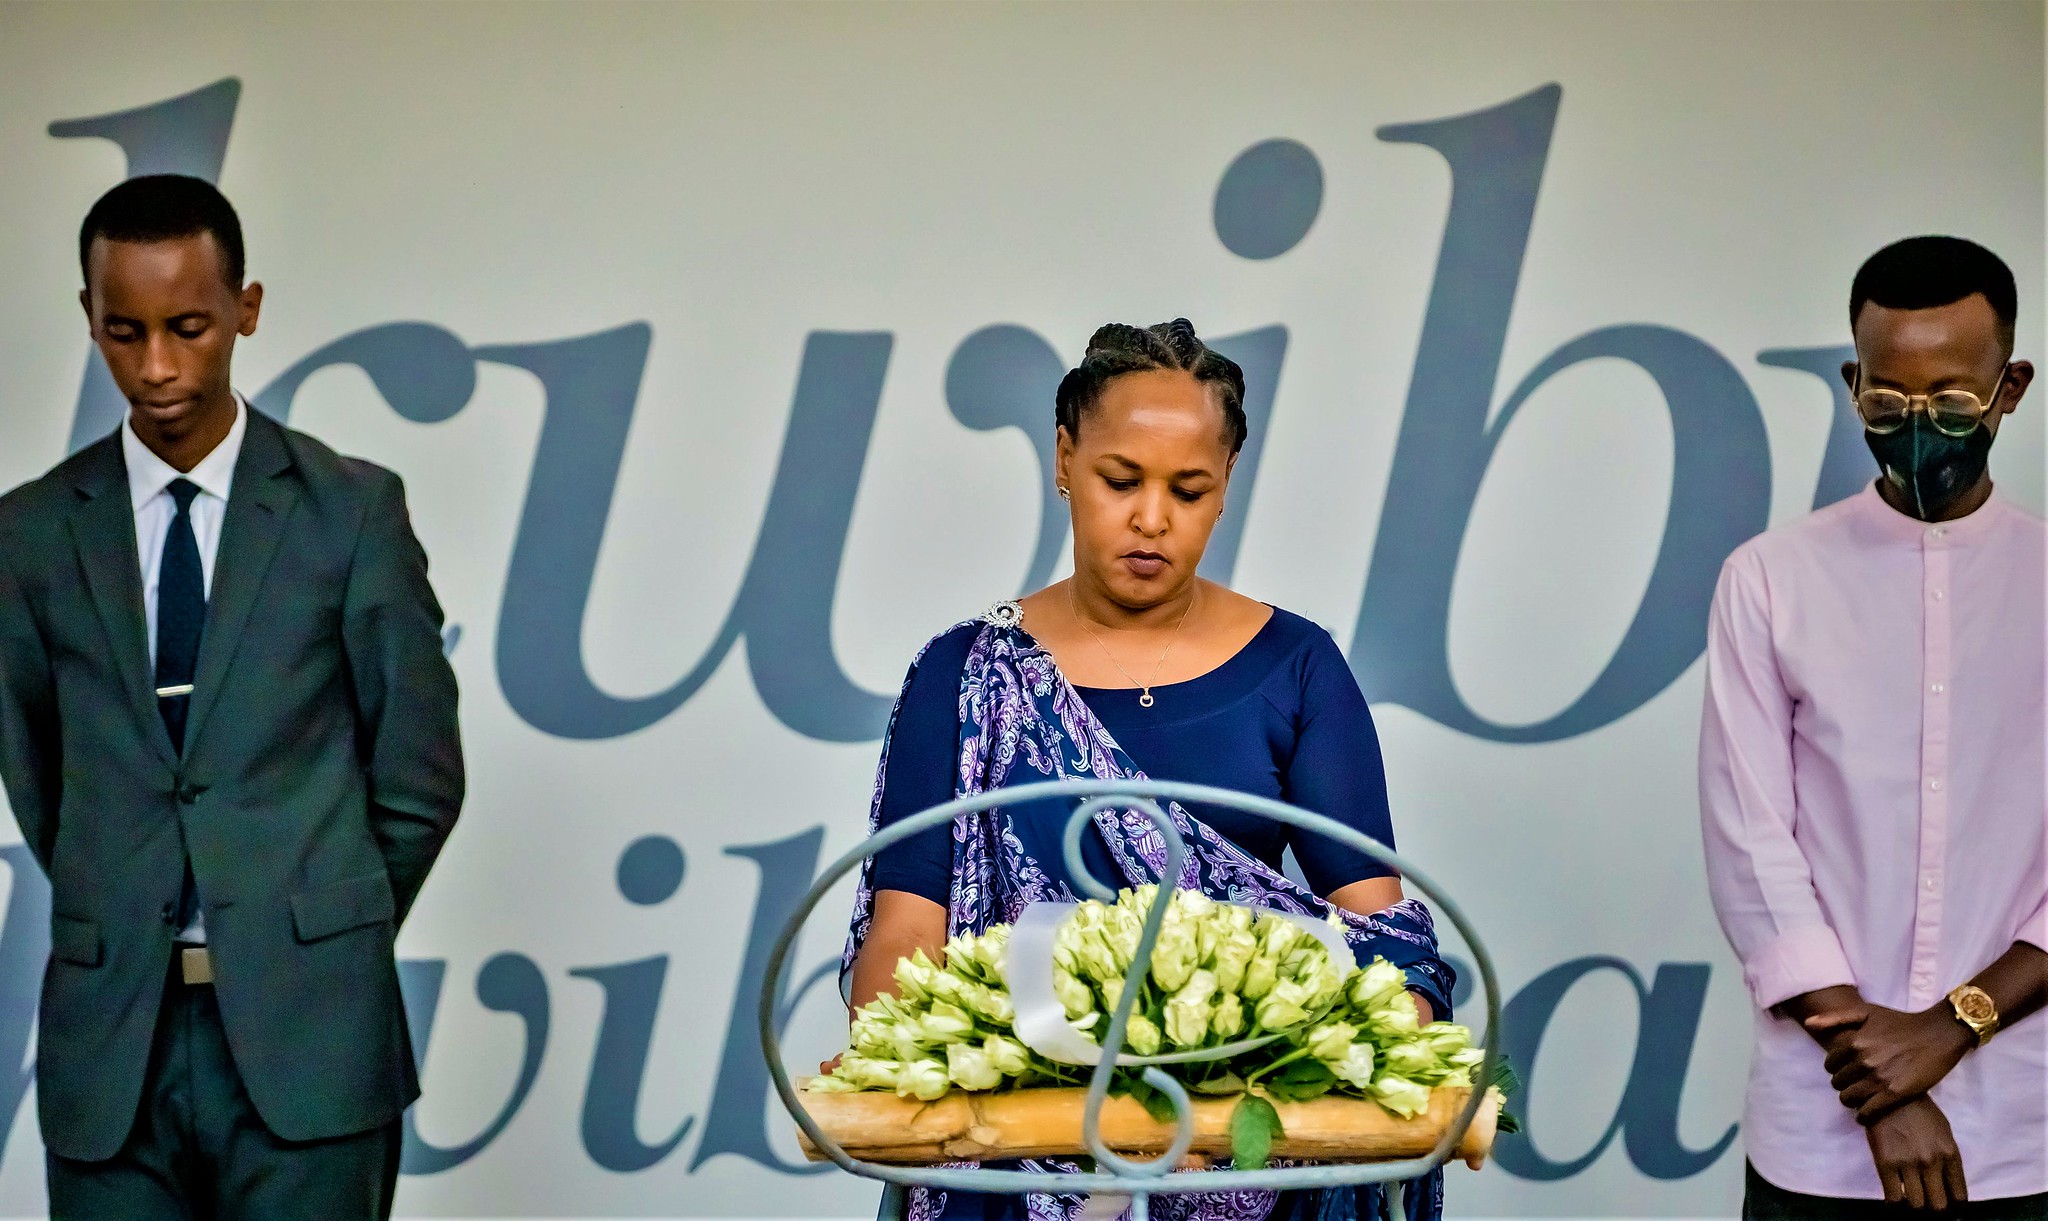 Minister of Youth & Culture, Rosemary Mbabazi, joins the youth gathered for Kwibuka at Kigali Genocide Memorial on May 29, 2022. 